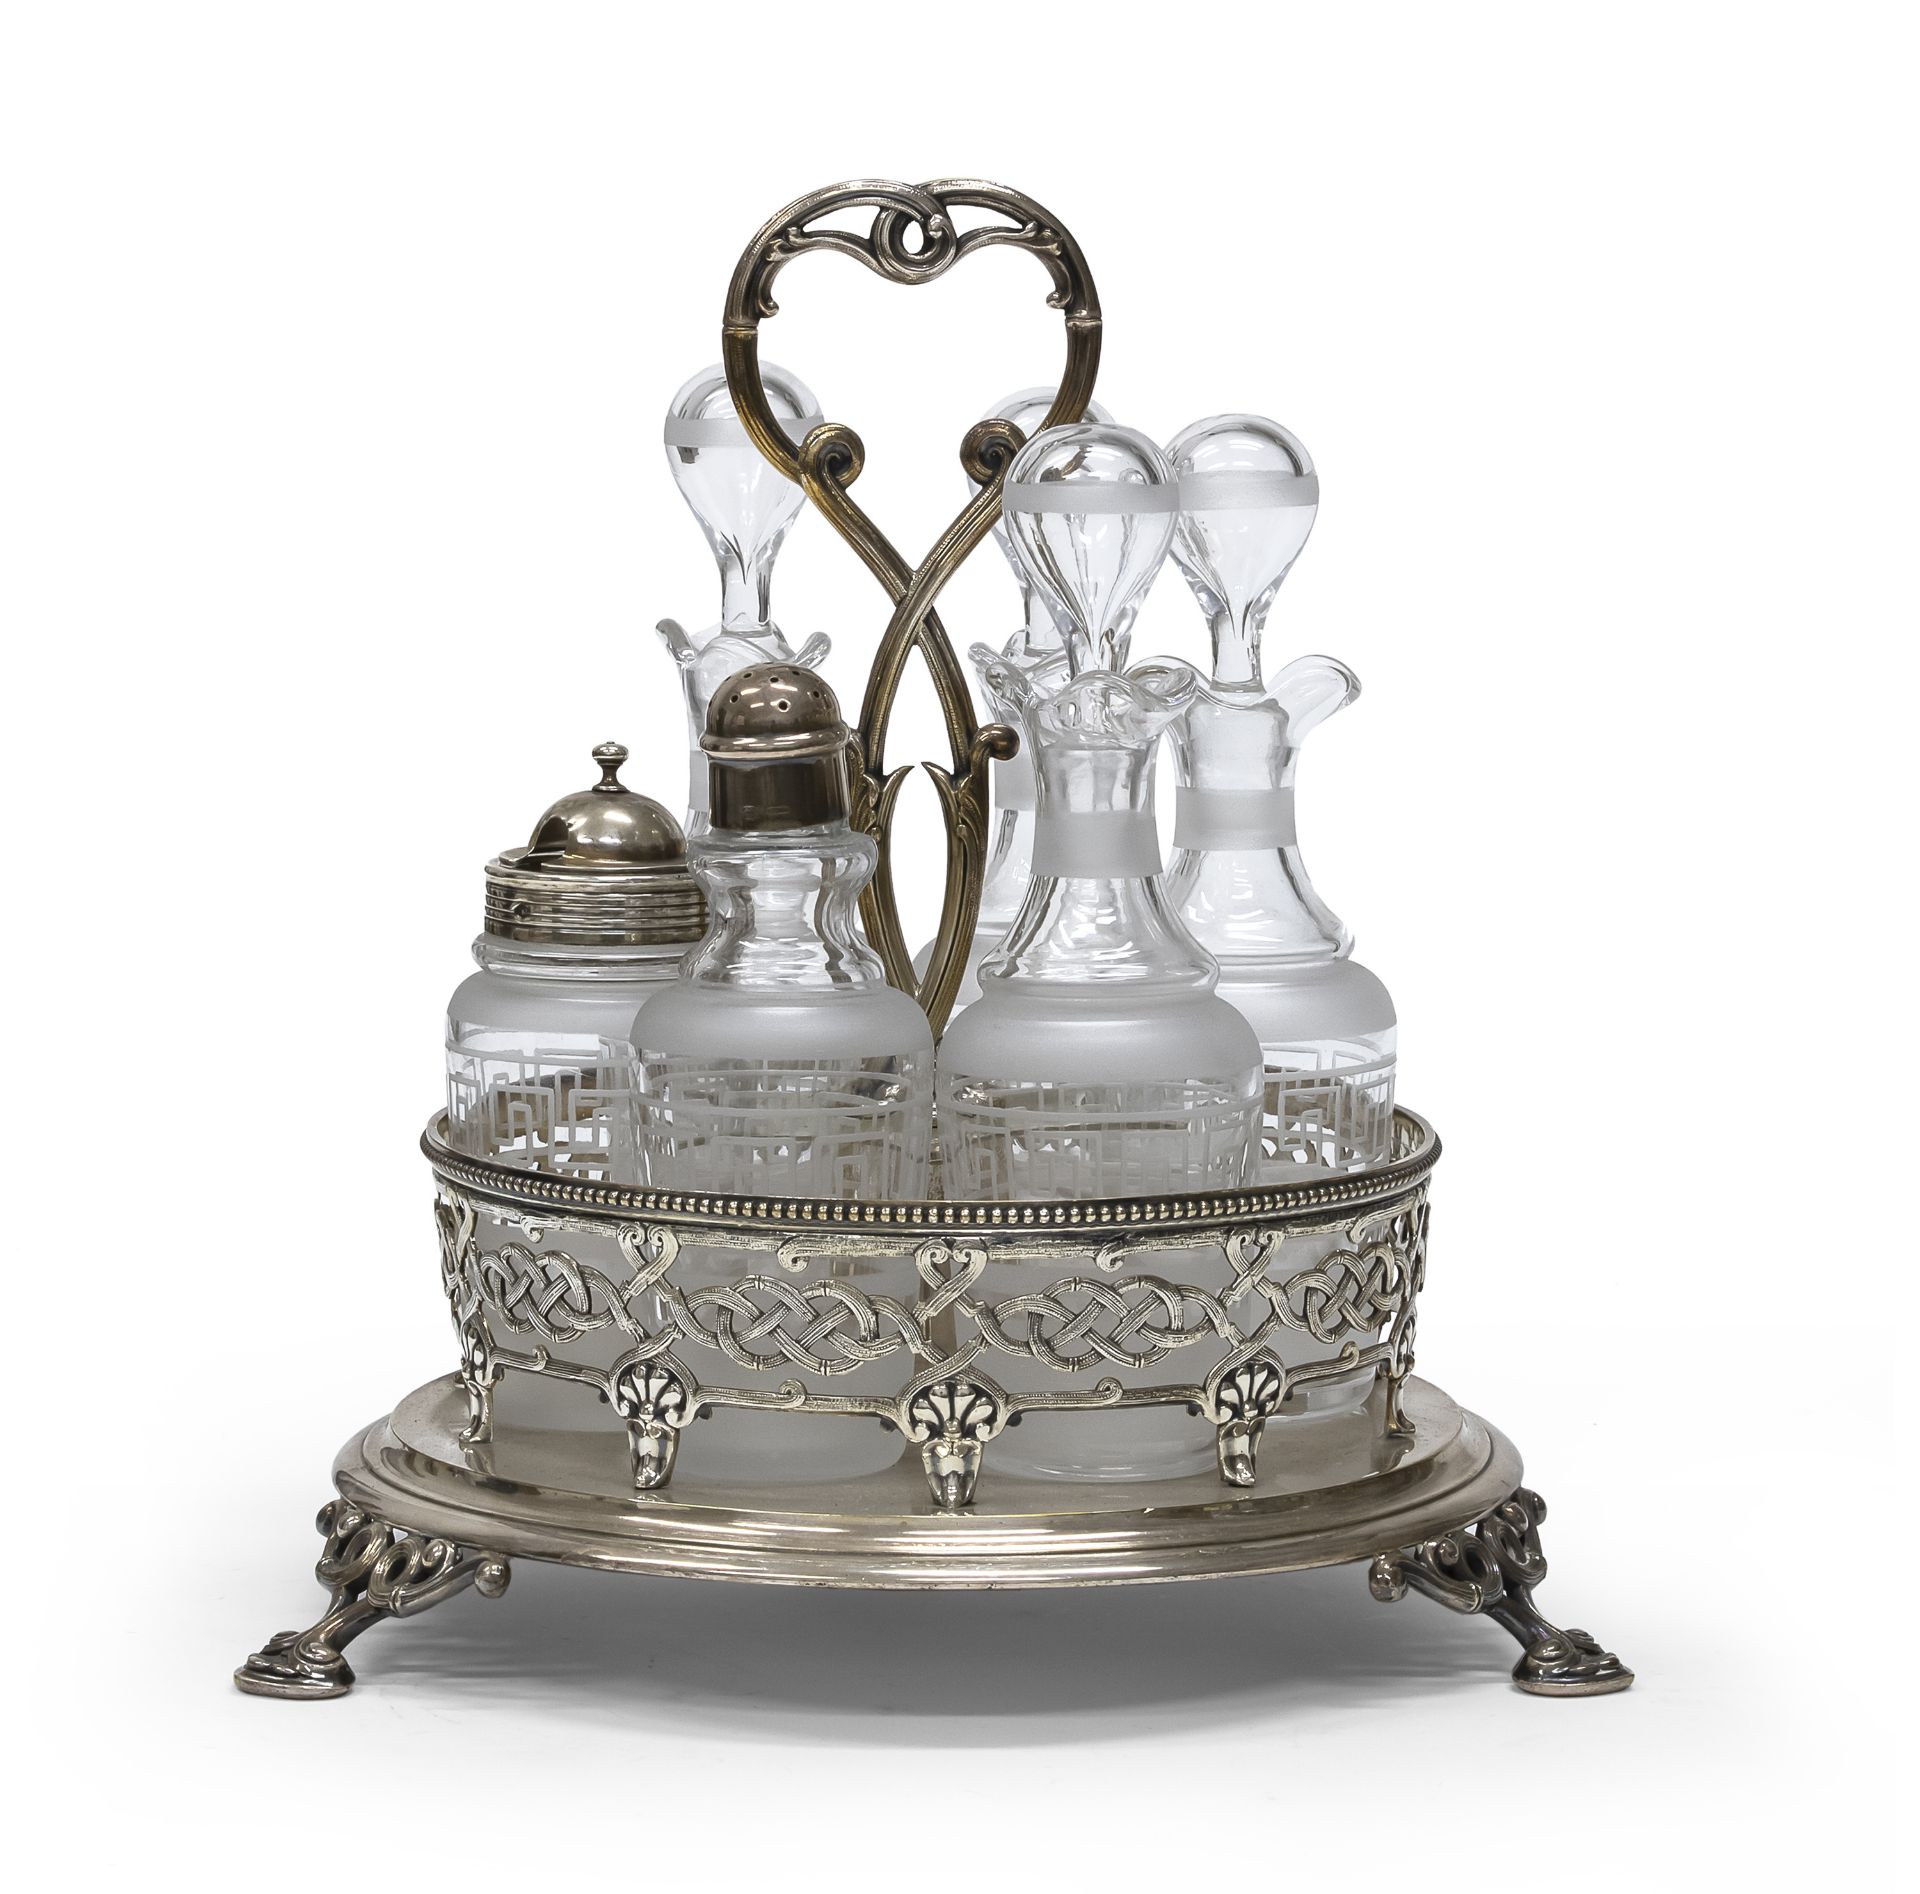 SILVER-PLATED OIL CRUET CHRISTOFLE EARLY 20TH CENTURY